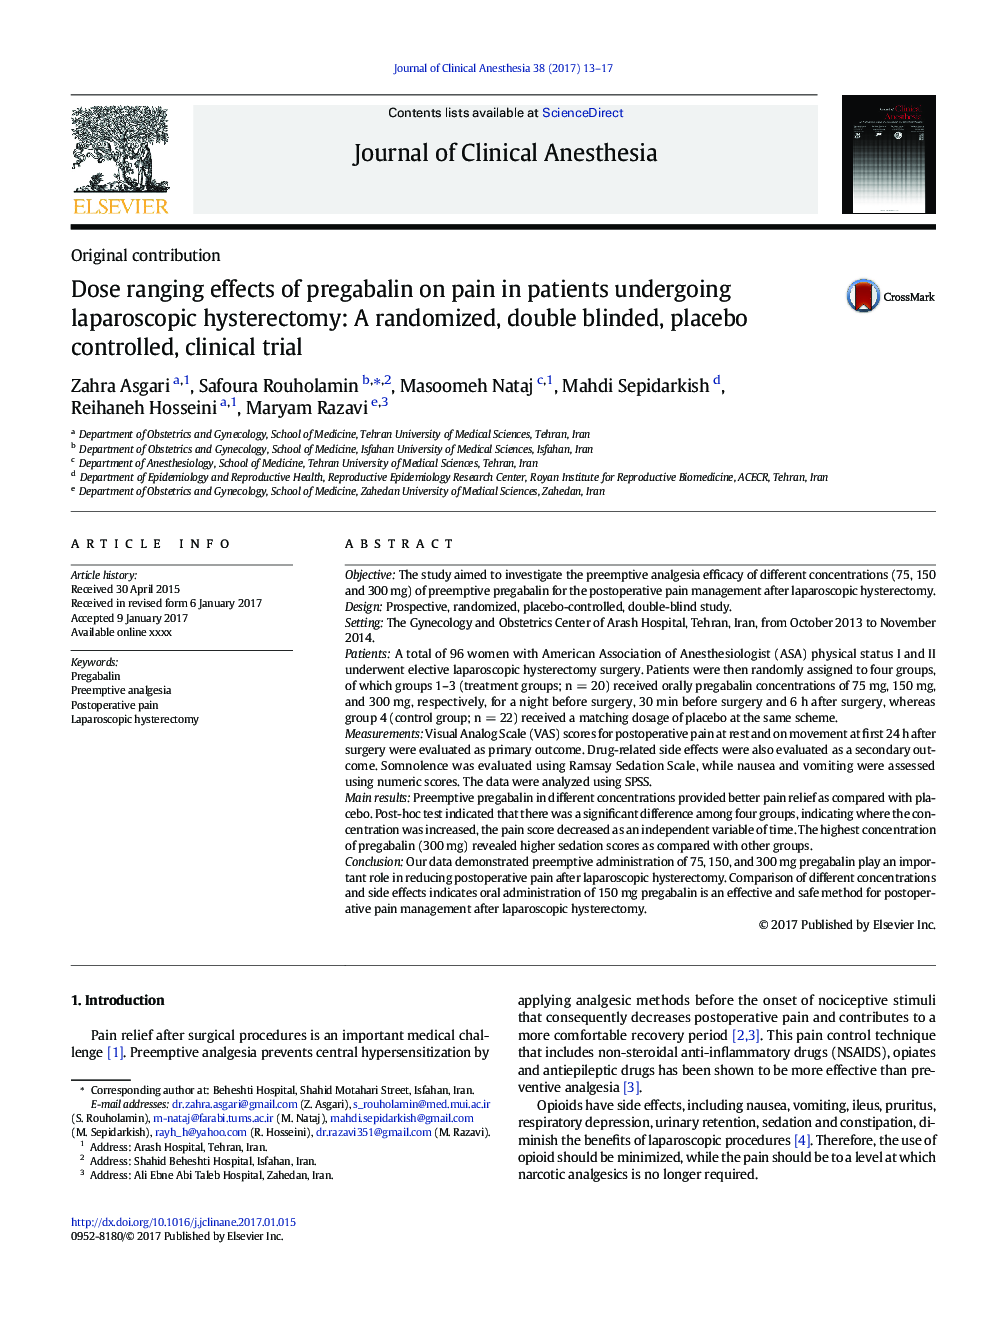 Dose ranging effects of pregabalin on pain in patients undergoing laparoscopic hysterectomy: A randomized, double blinded, placebo controlled, clinical trial